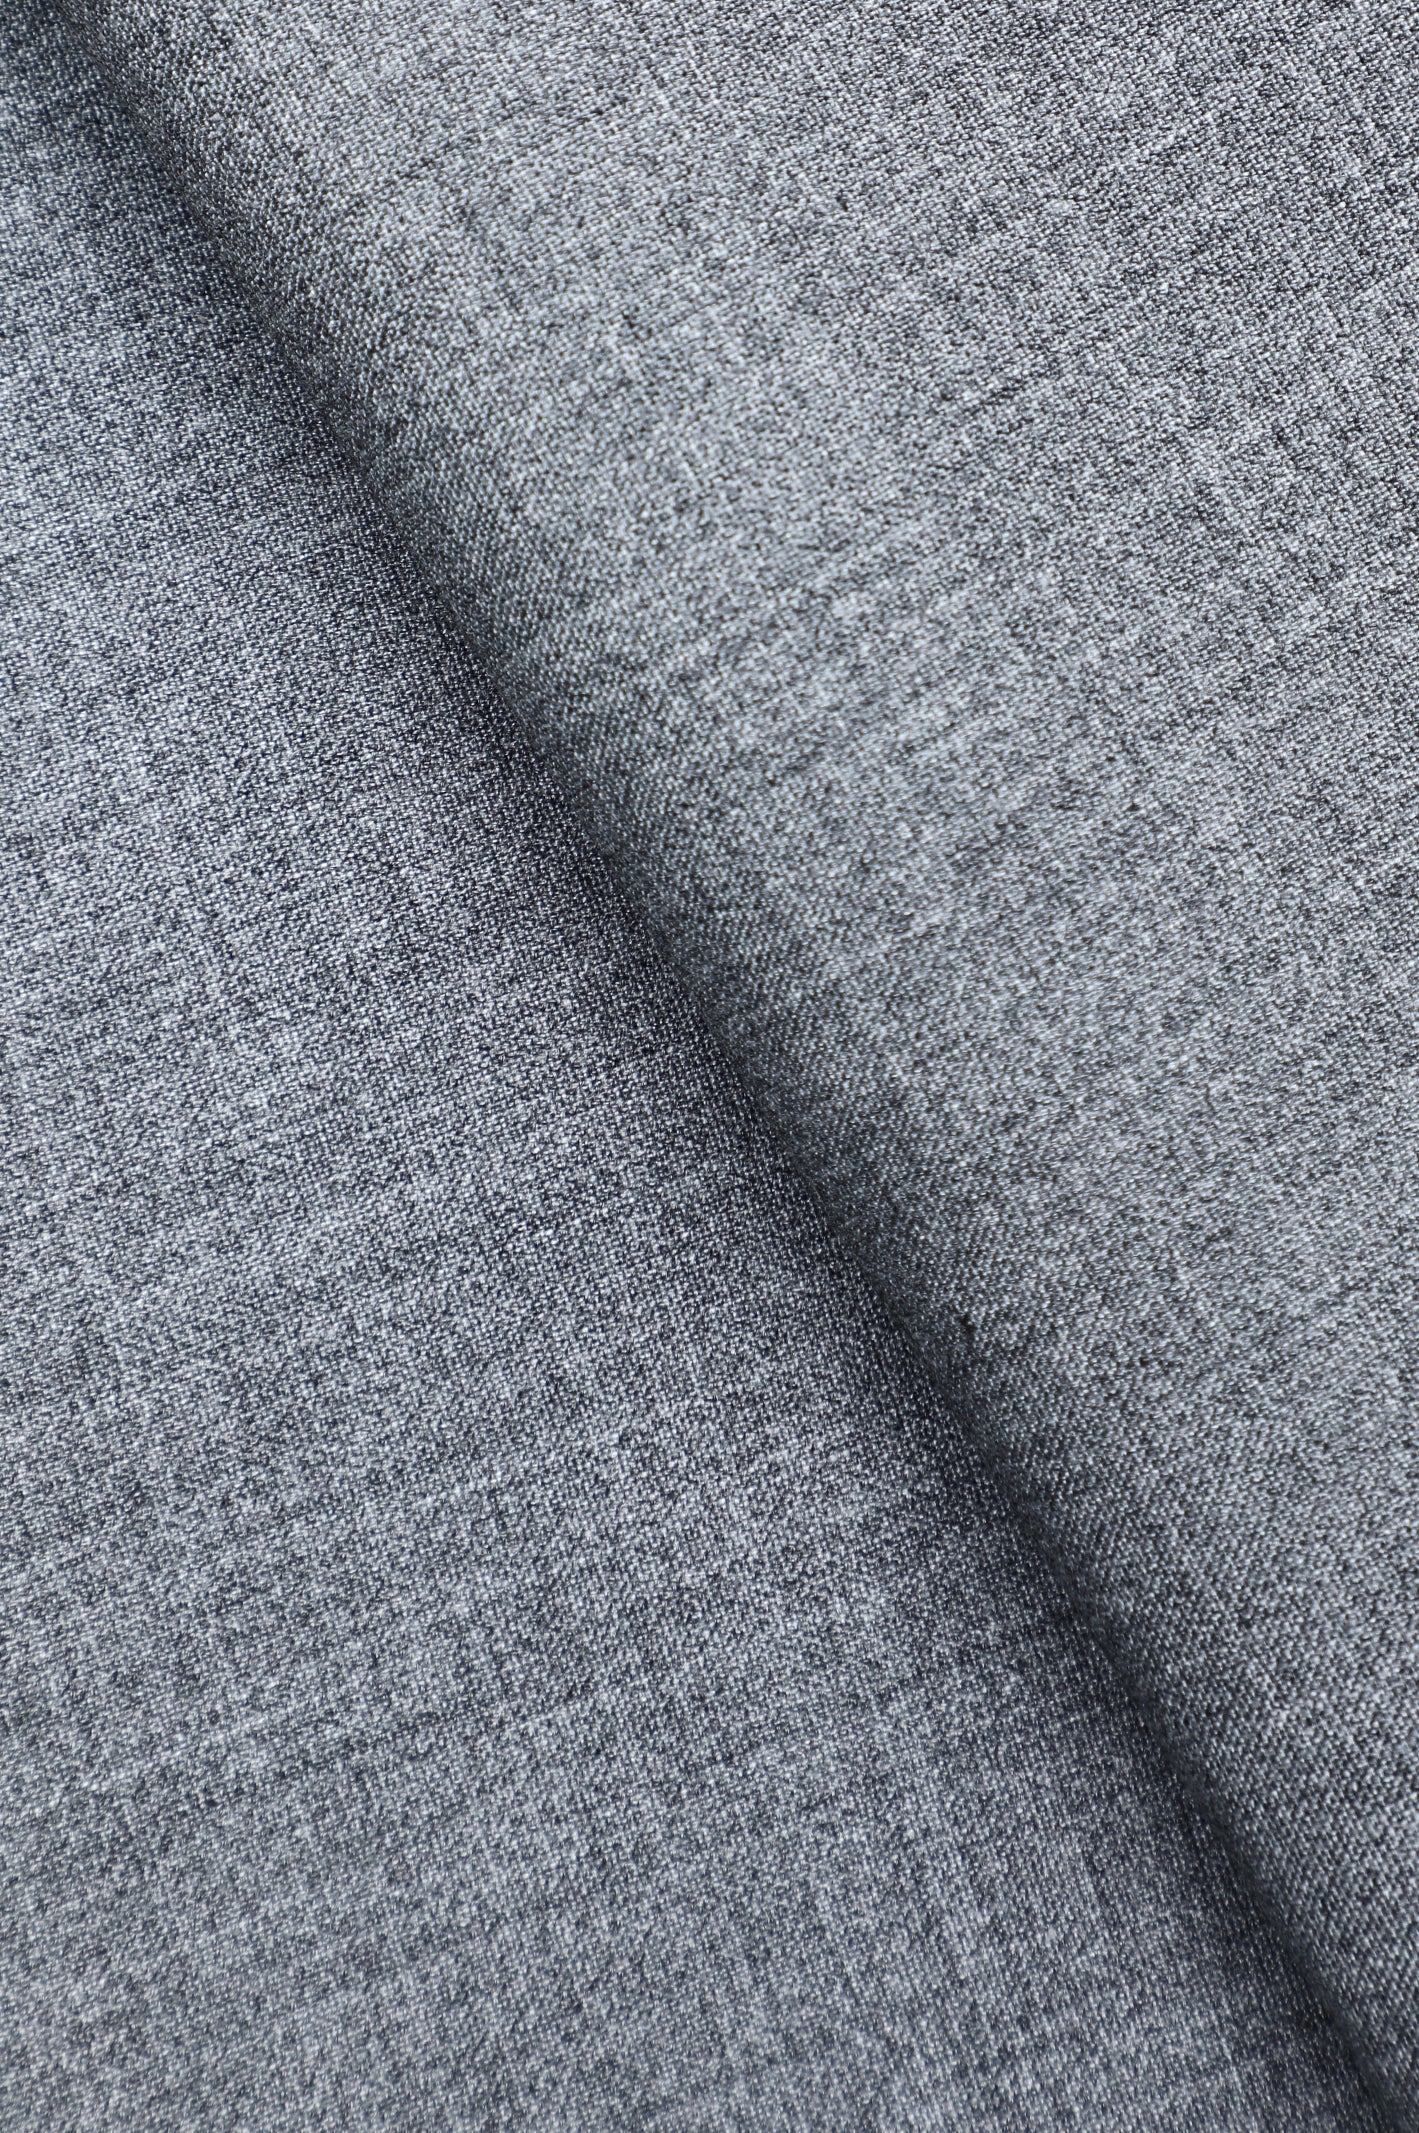 Unstitched Fabric for Men SKU: US0200-GREY - Diners